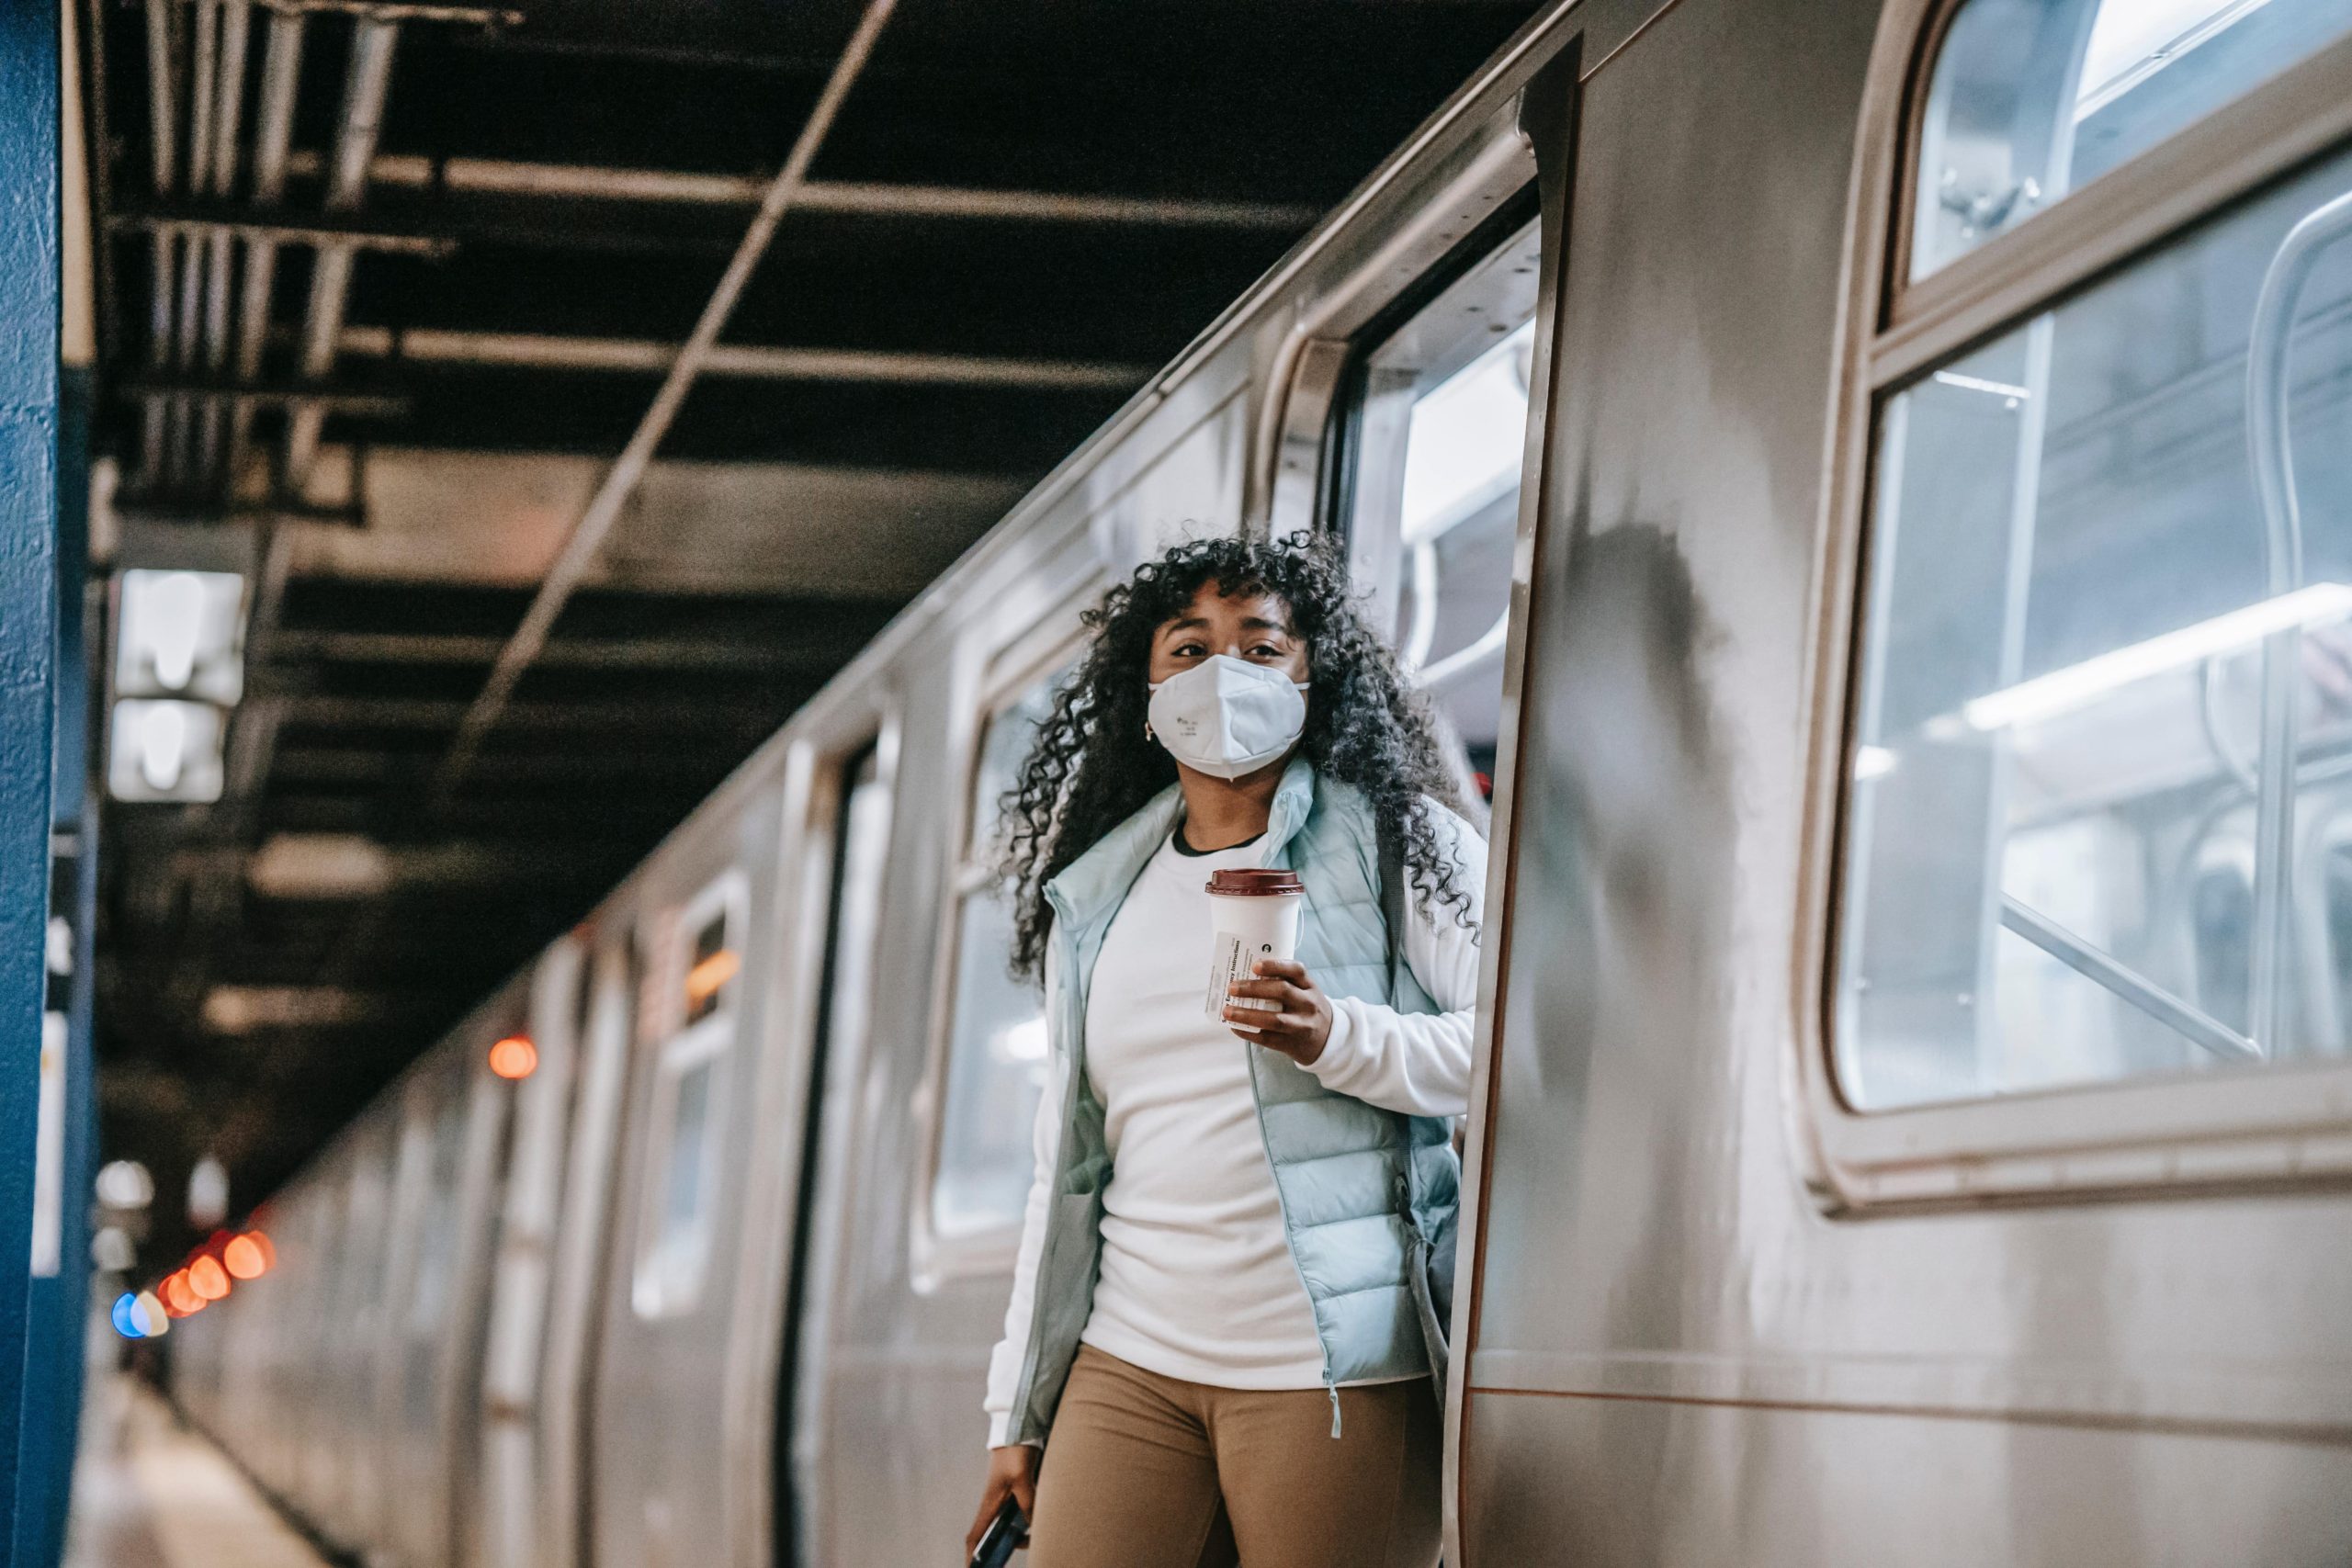 Lady walking out of train with face mask